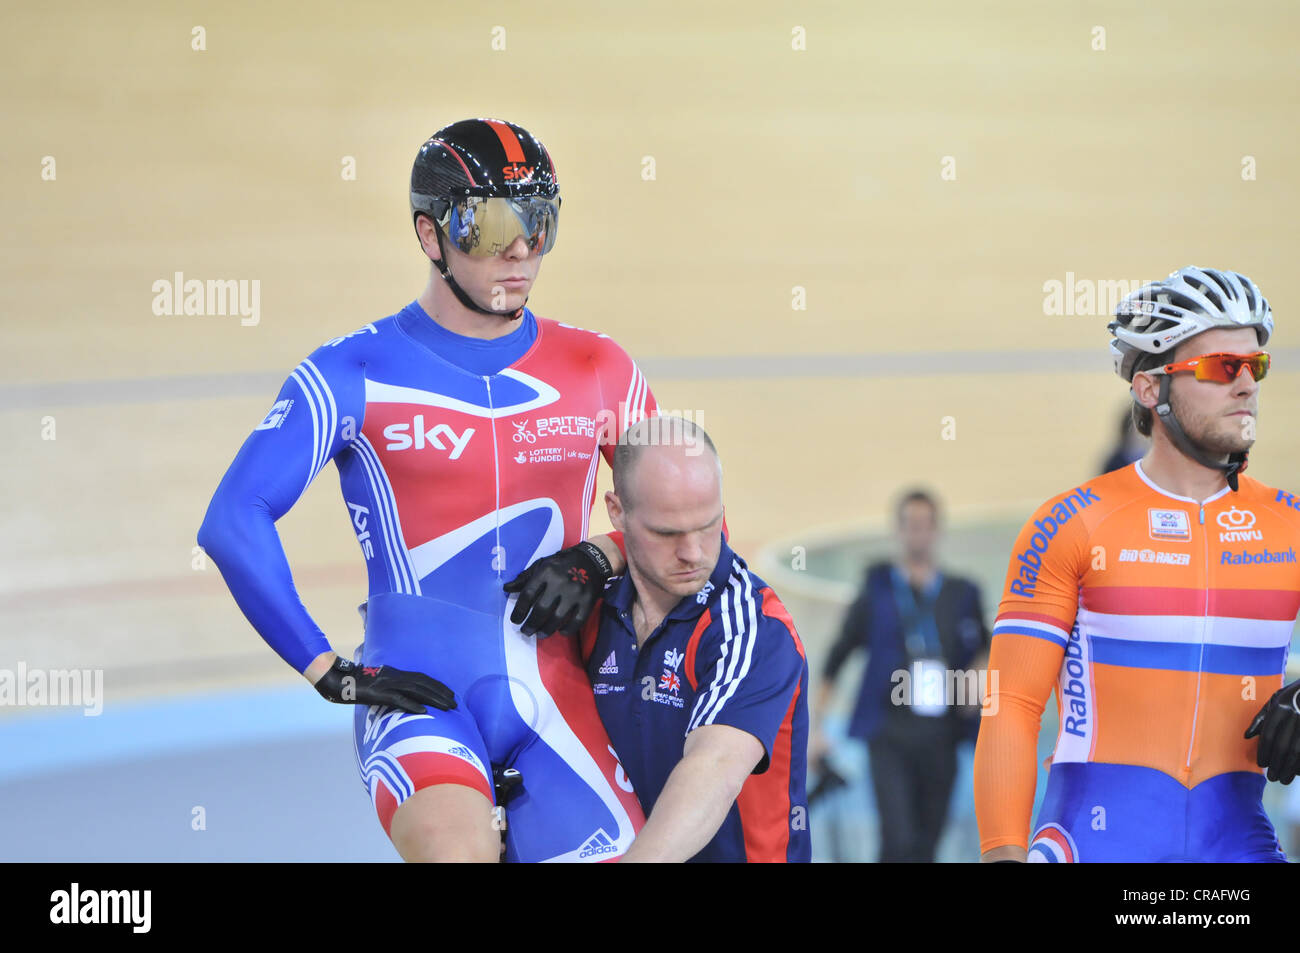 Sir Chris Hoy MBE at the start of the Men's sprint at the UCI Track Cycling World Cup, London 2012 Velodrome. LOCOG Test-Event. Stock Photo